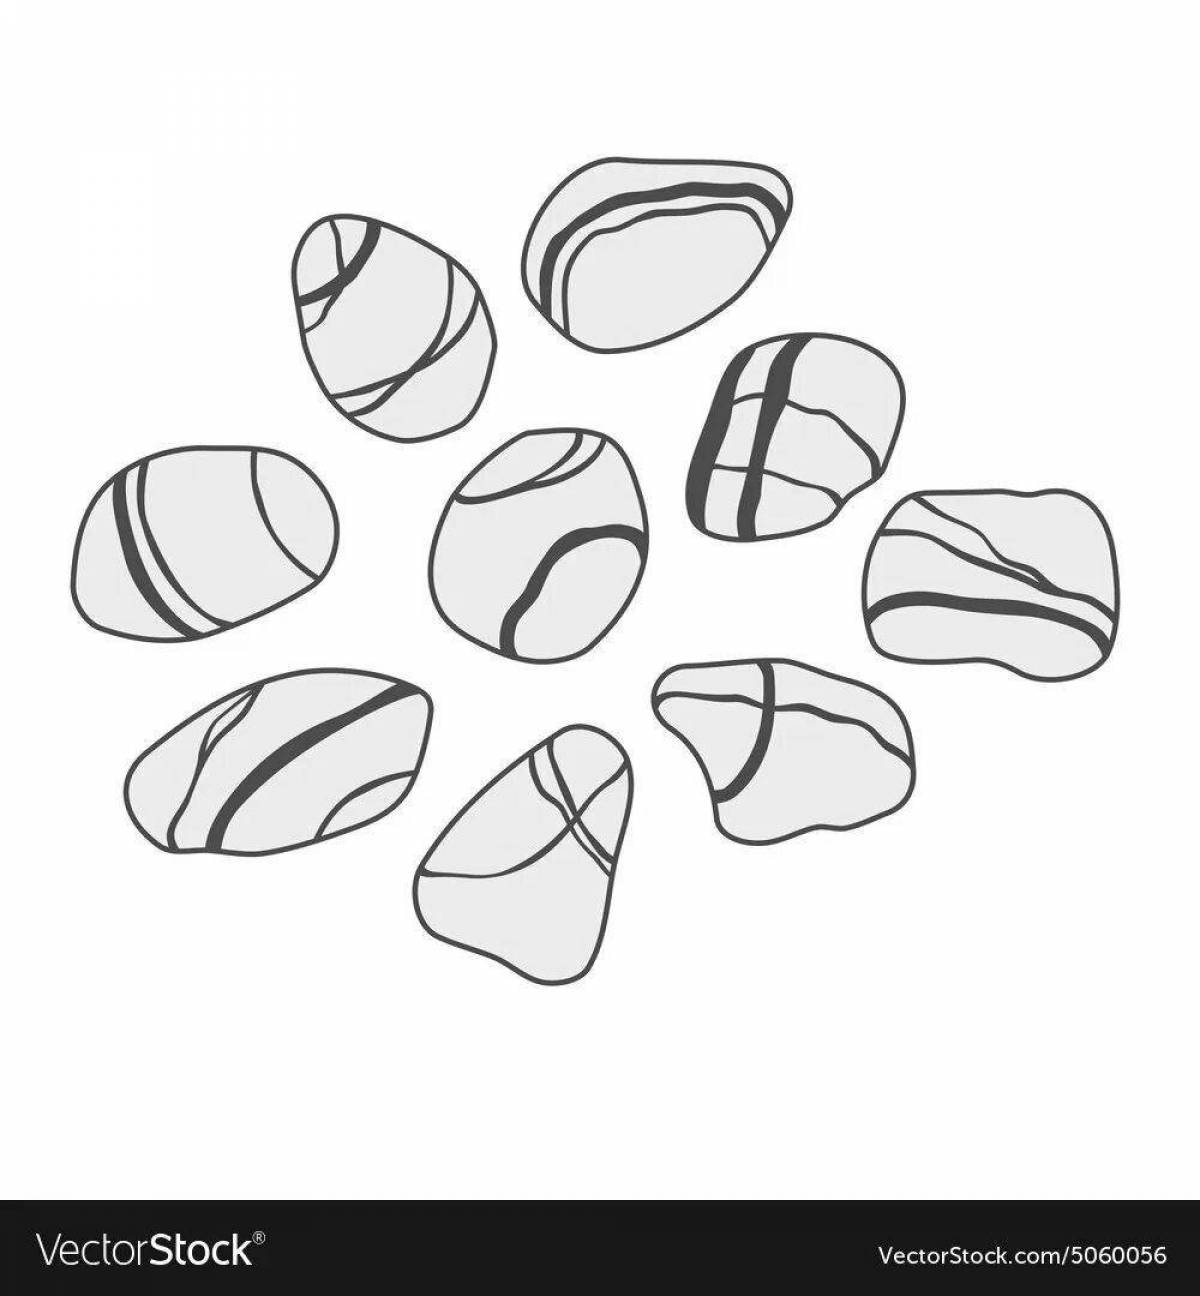 Colored stone coloring page for kids